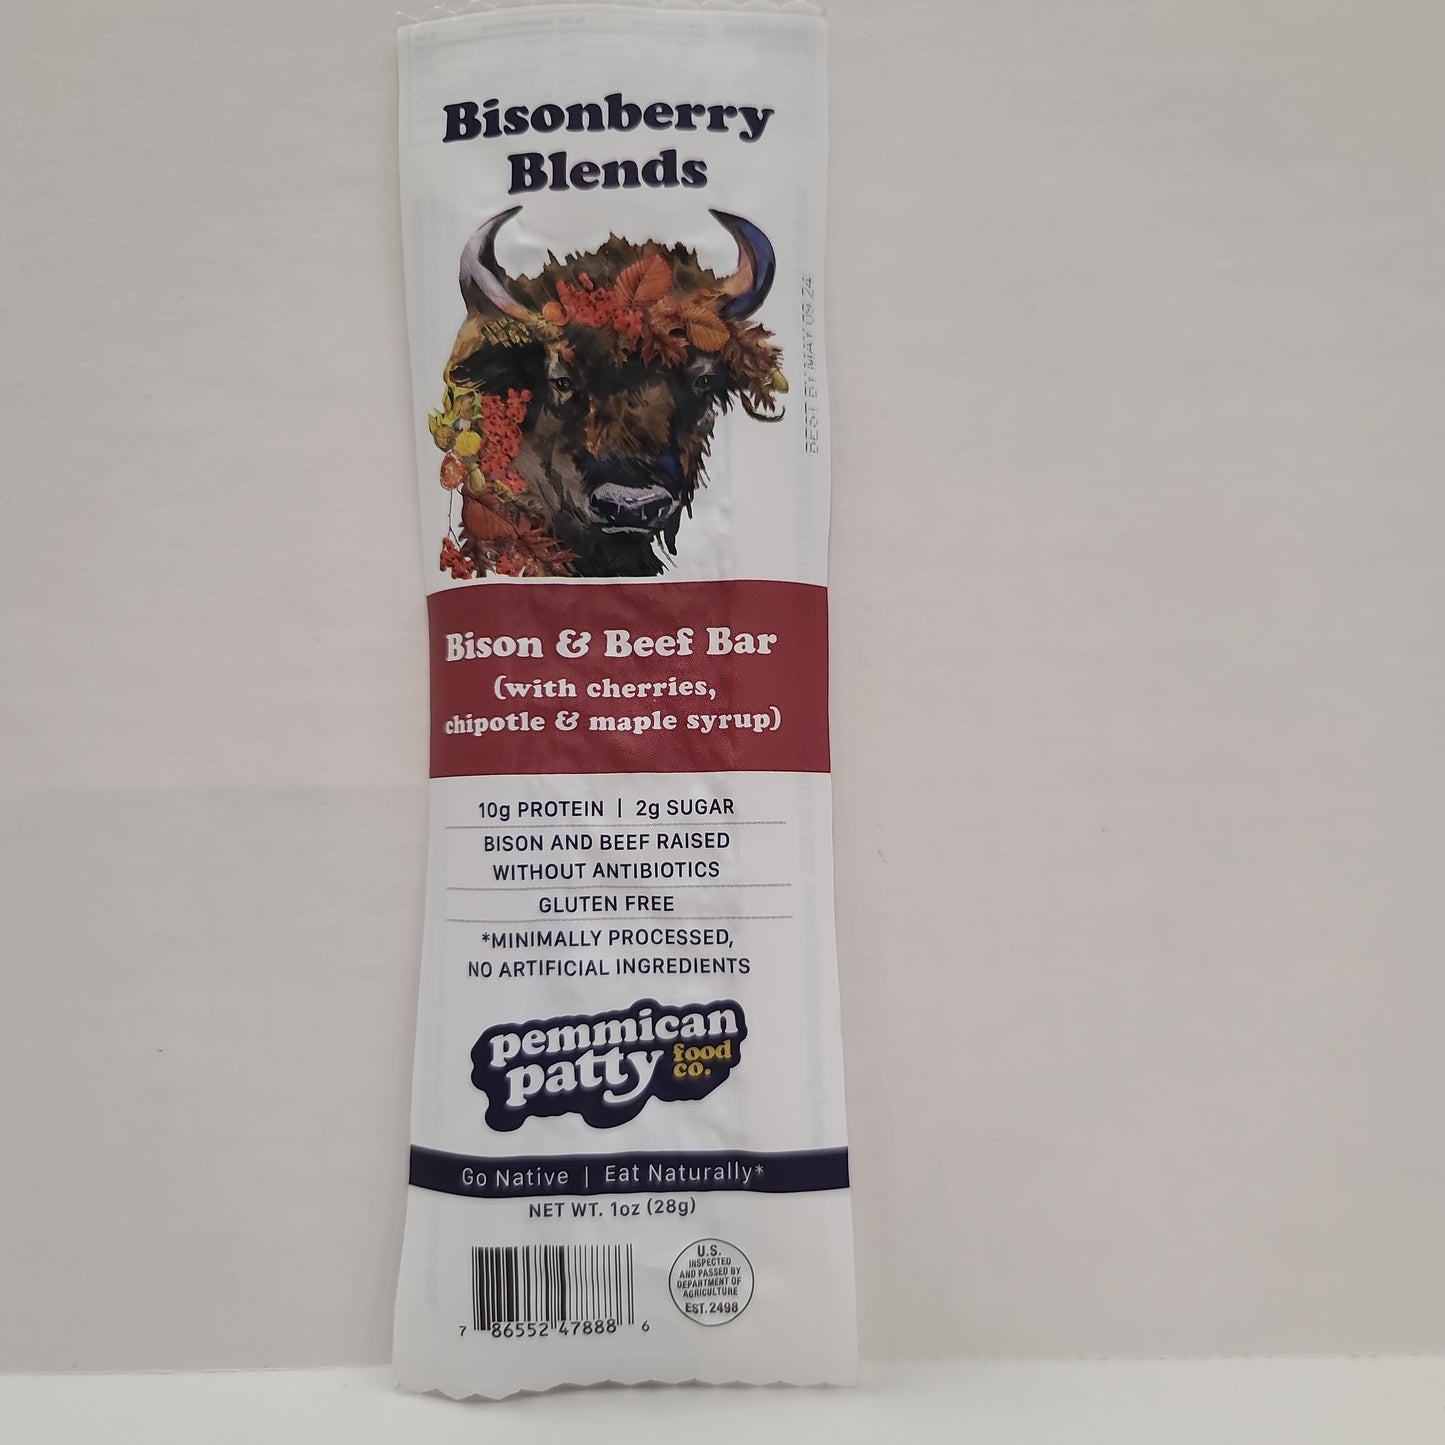 Pemmican Patty Bisonberry Blends Cherry Chipotle & Maple Syrup Bison & Beef Bar